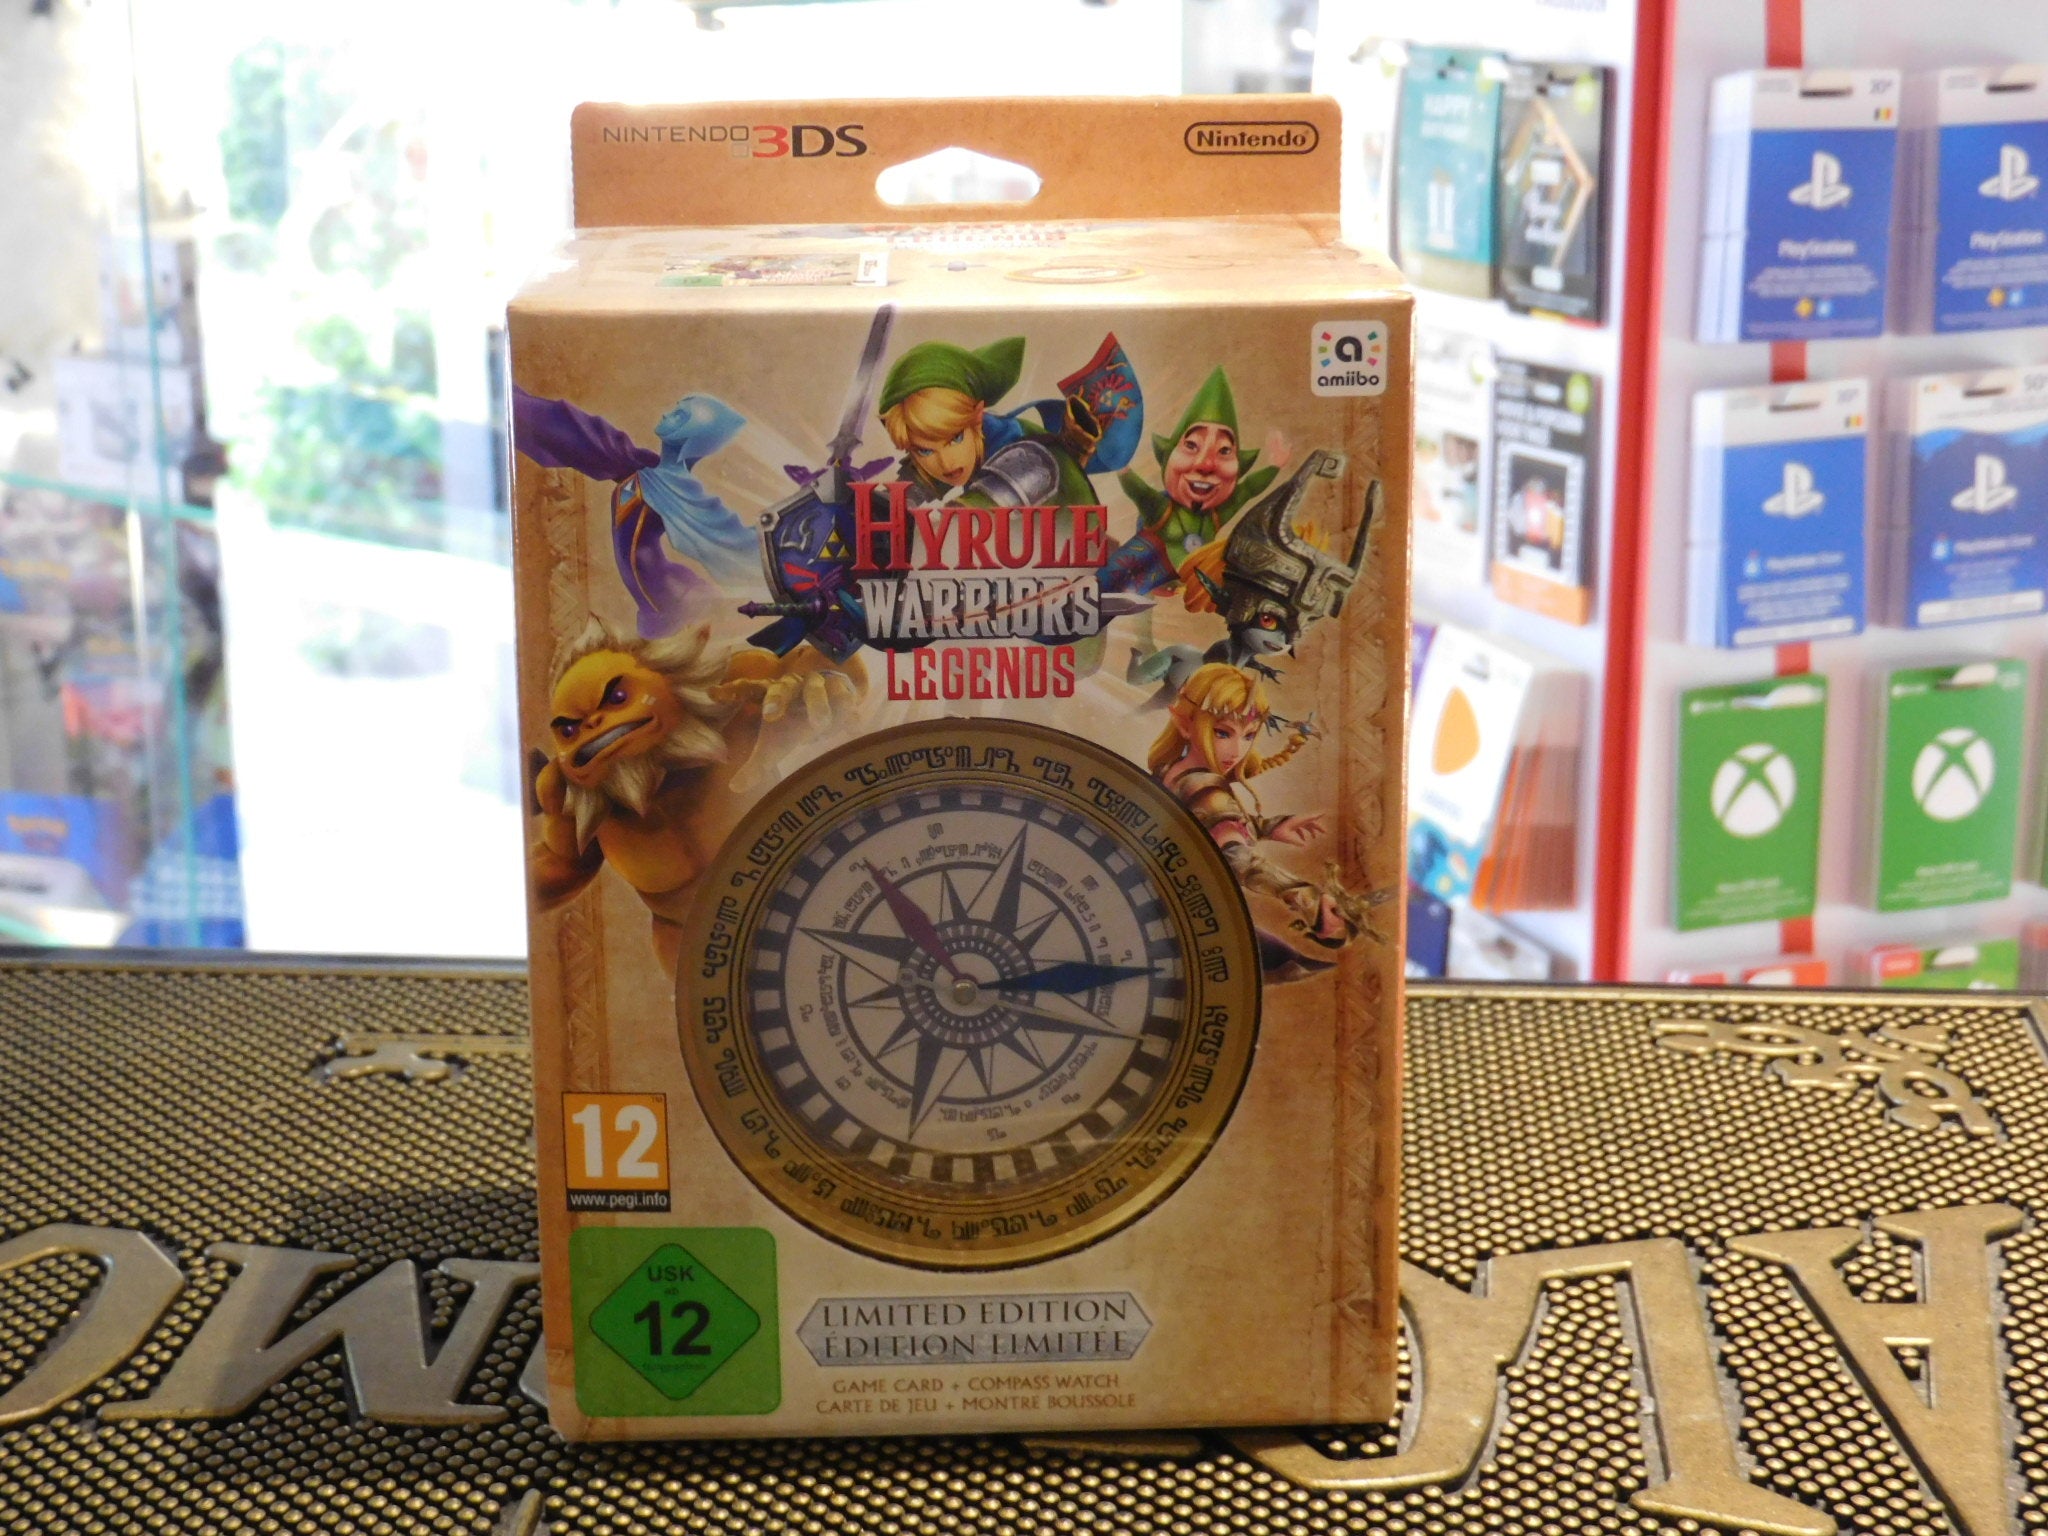 HYRULE WARRIORS LEGENDS LIMITED EDITION